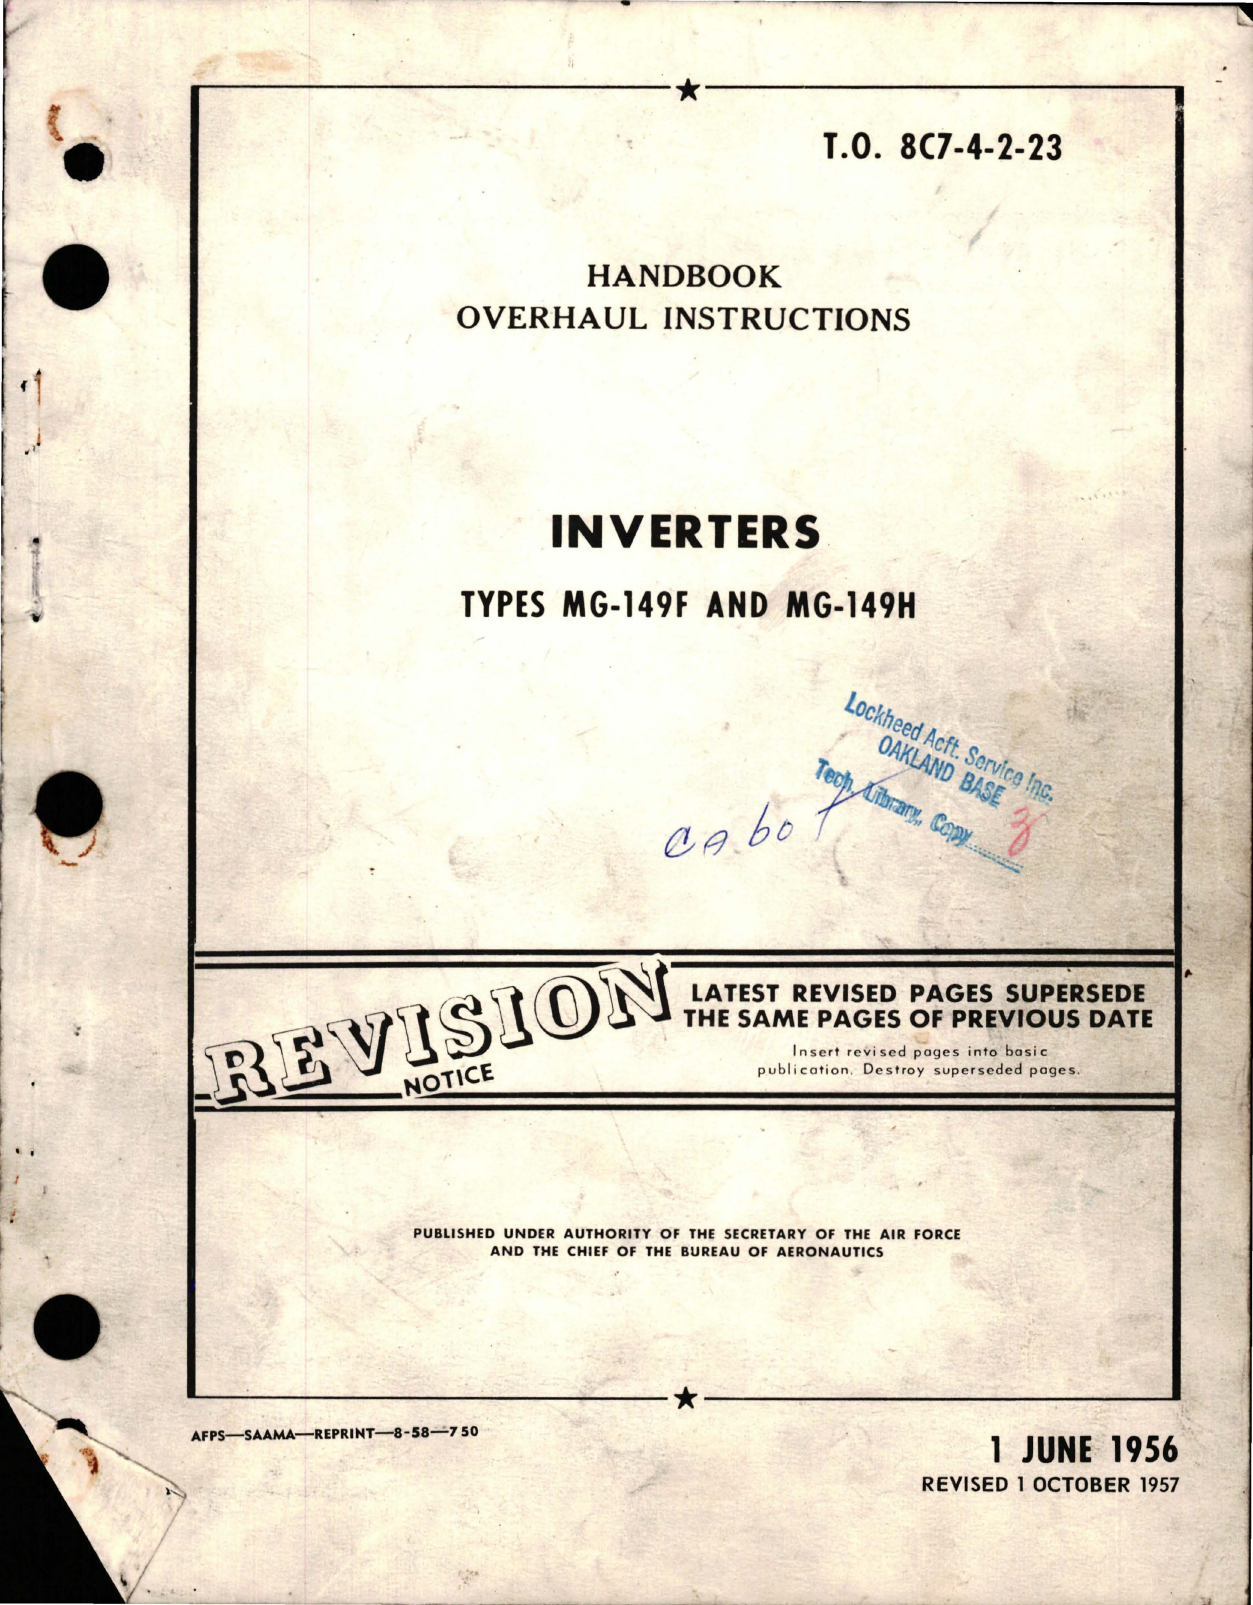 Sample page 1 from AirCorps Library document: Overhaul Instructions for Inverters - Types MG-149F and MG-149H